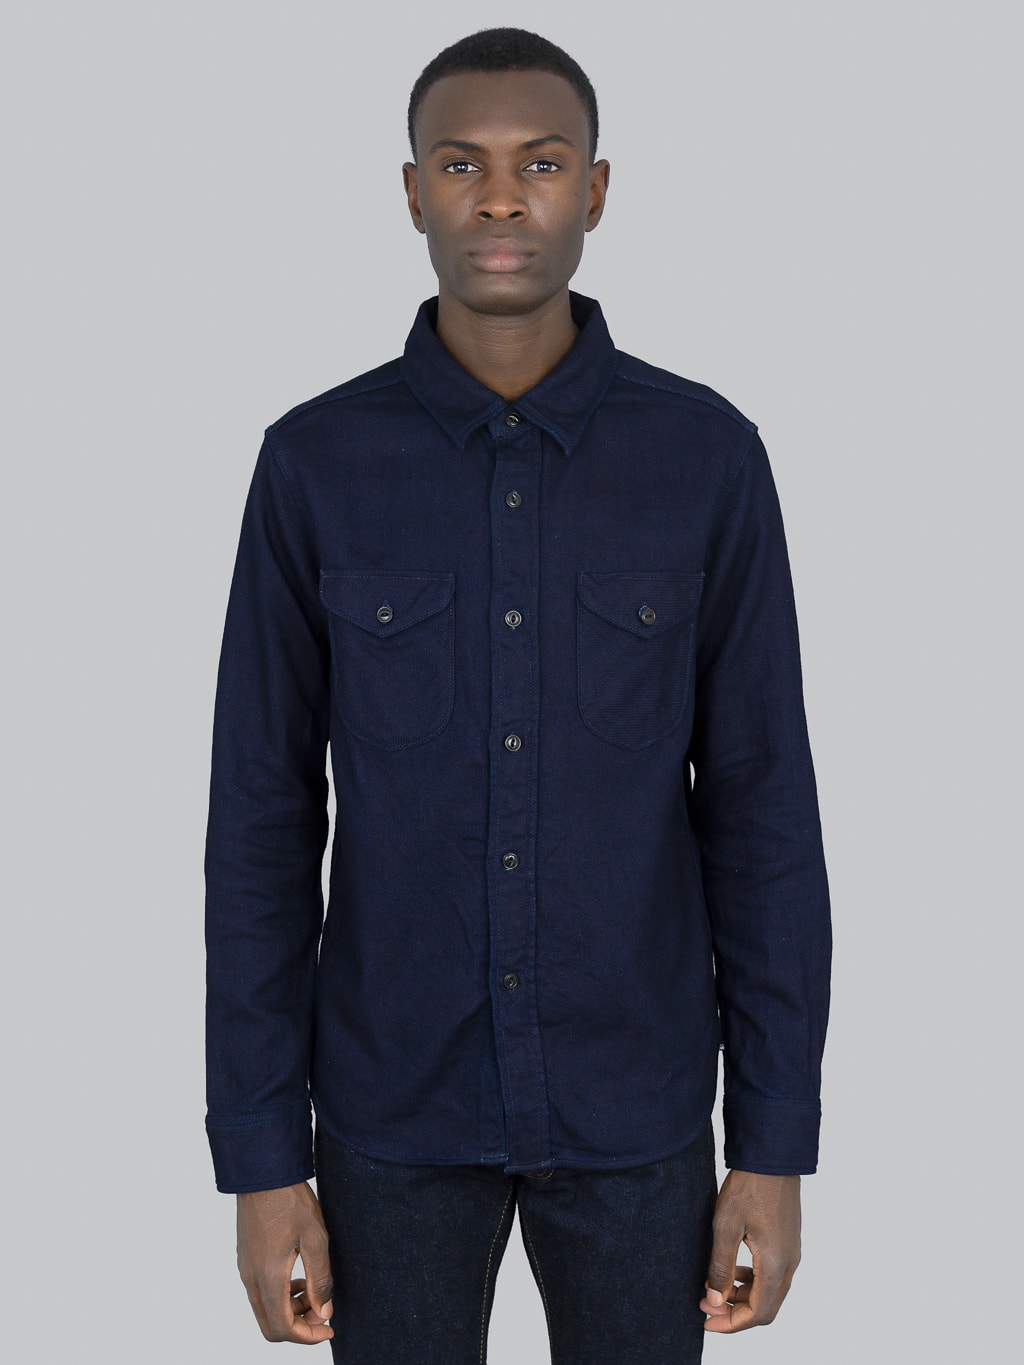 UES Indigo Heavy Selvedge Flannel Shirt model front fit